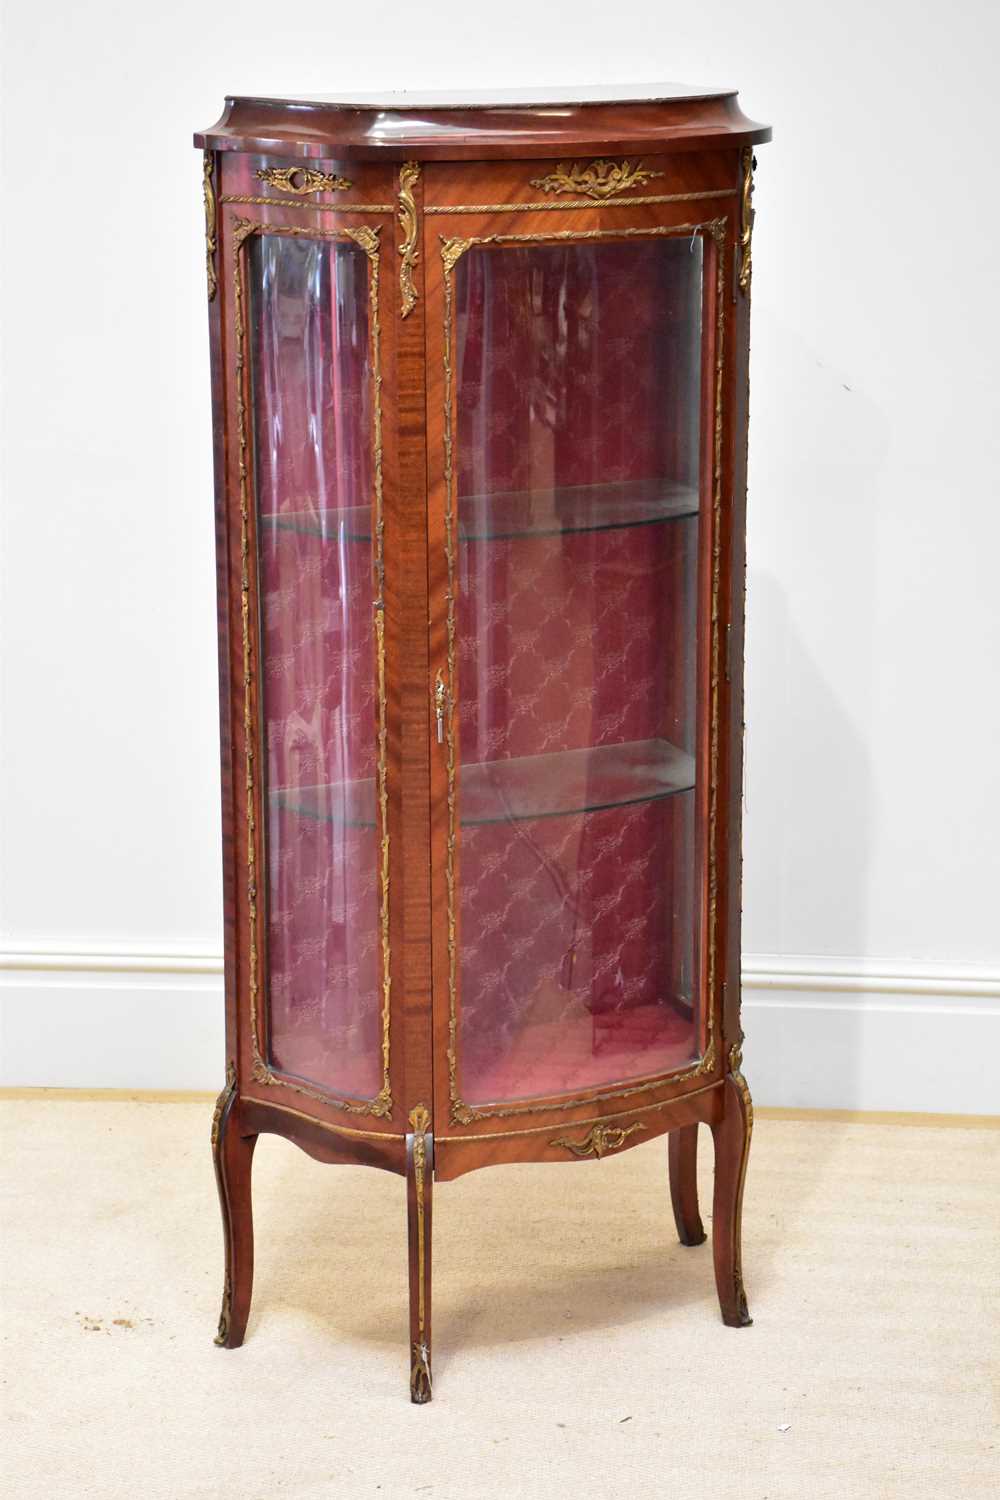 A reproduction kingwood bowfront vitrine with applied gilt metal detail, the glazed door enclosing